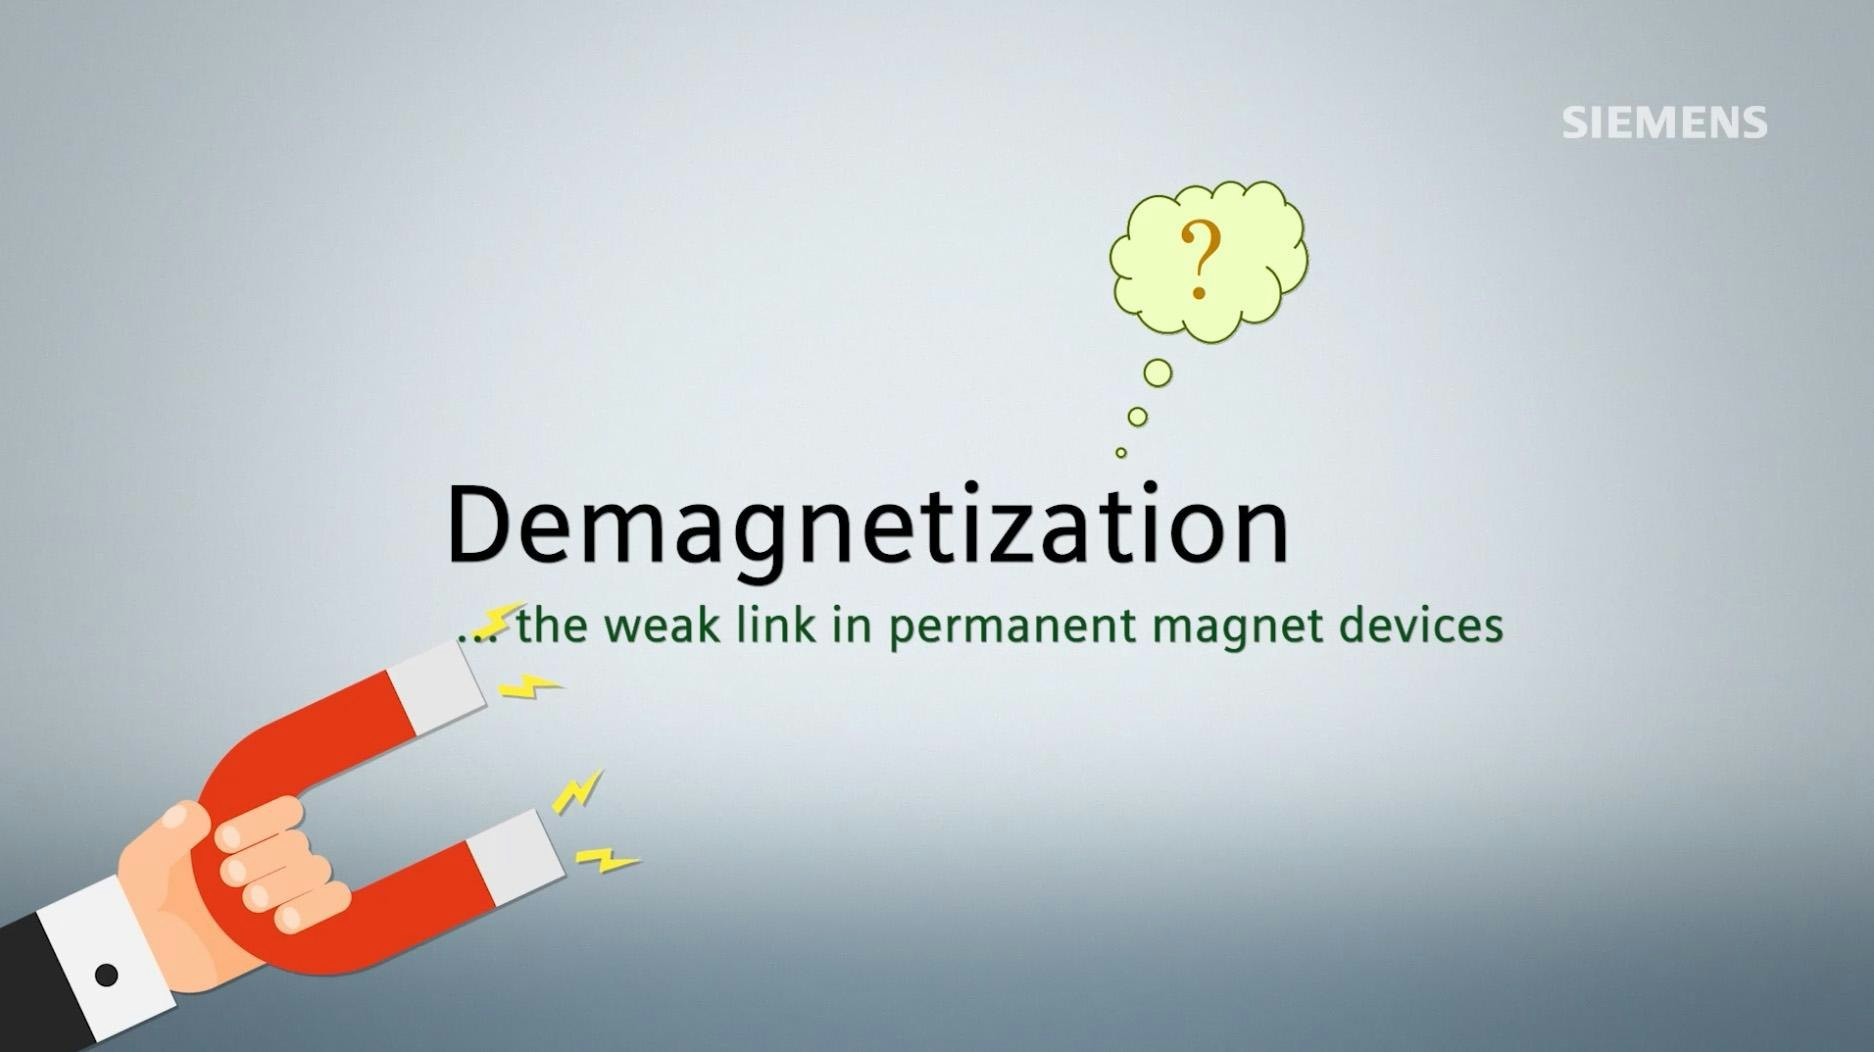 demagnetization of permanent magnets